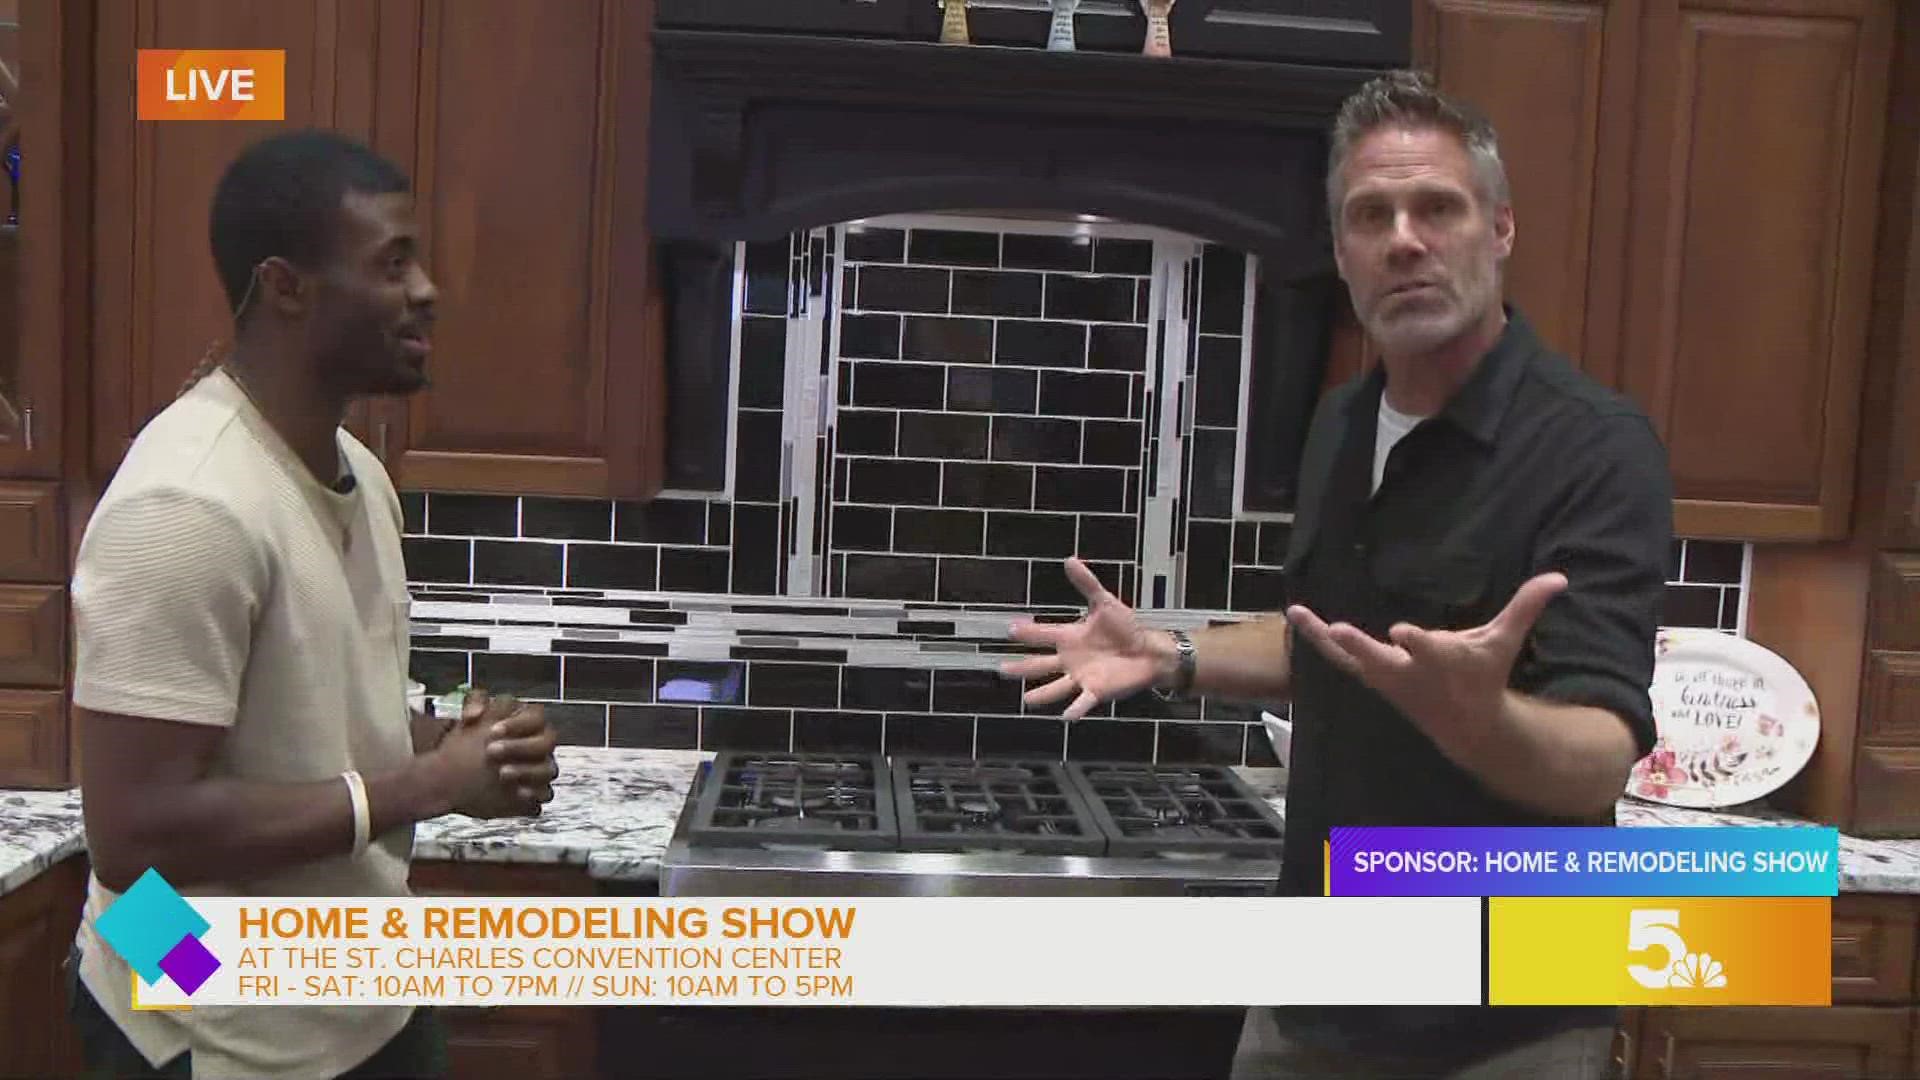 Malik previews this weekend's event with Jeff Devlin, TV star and licensed contractor, at the St. Charles Convention Center.